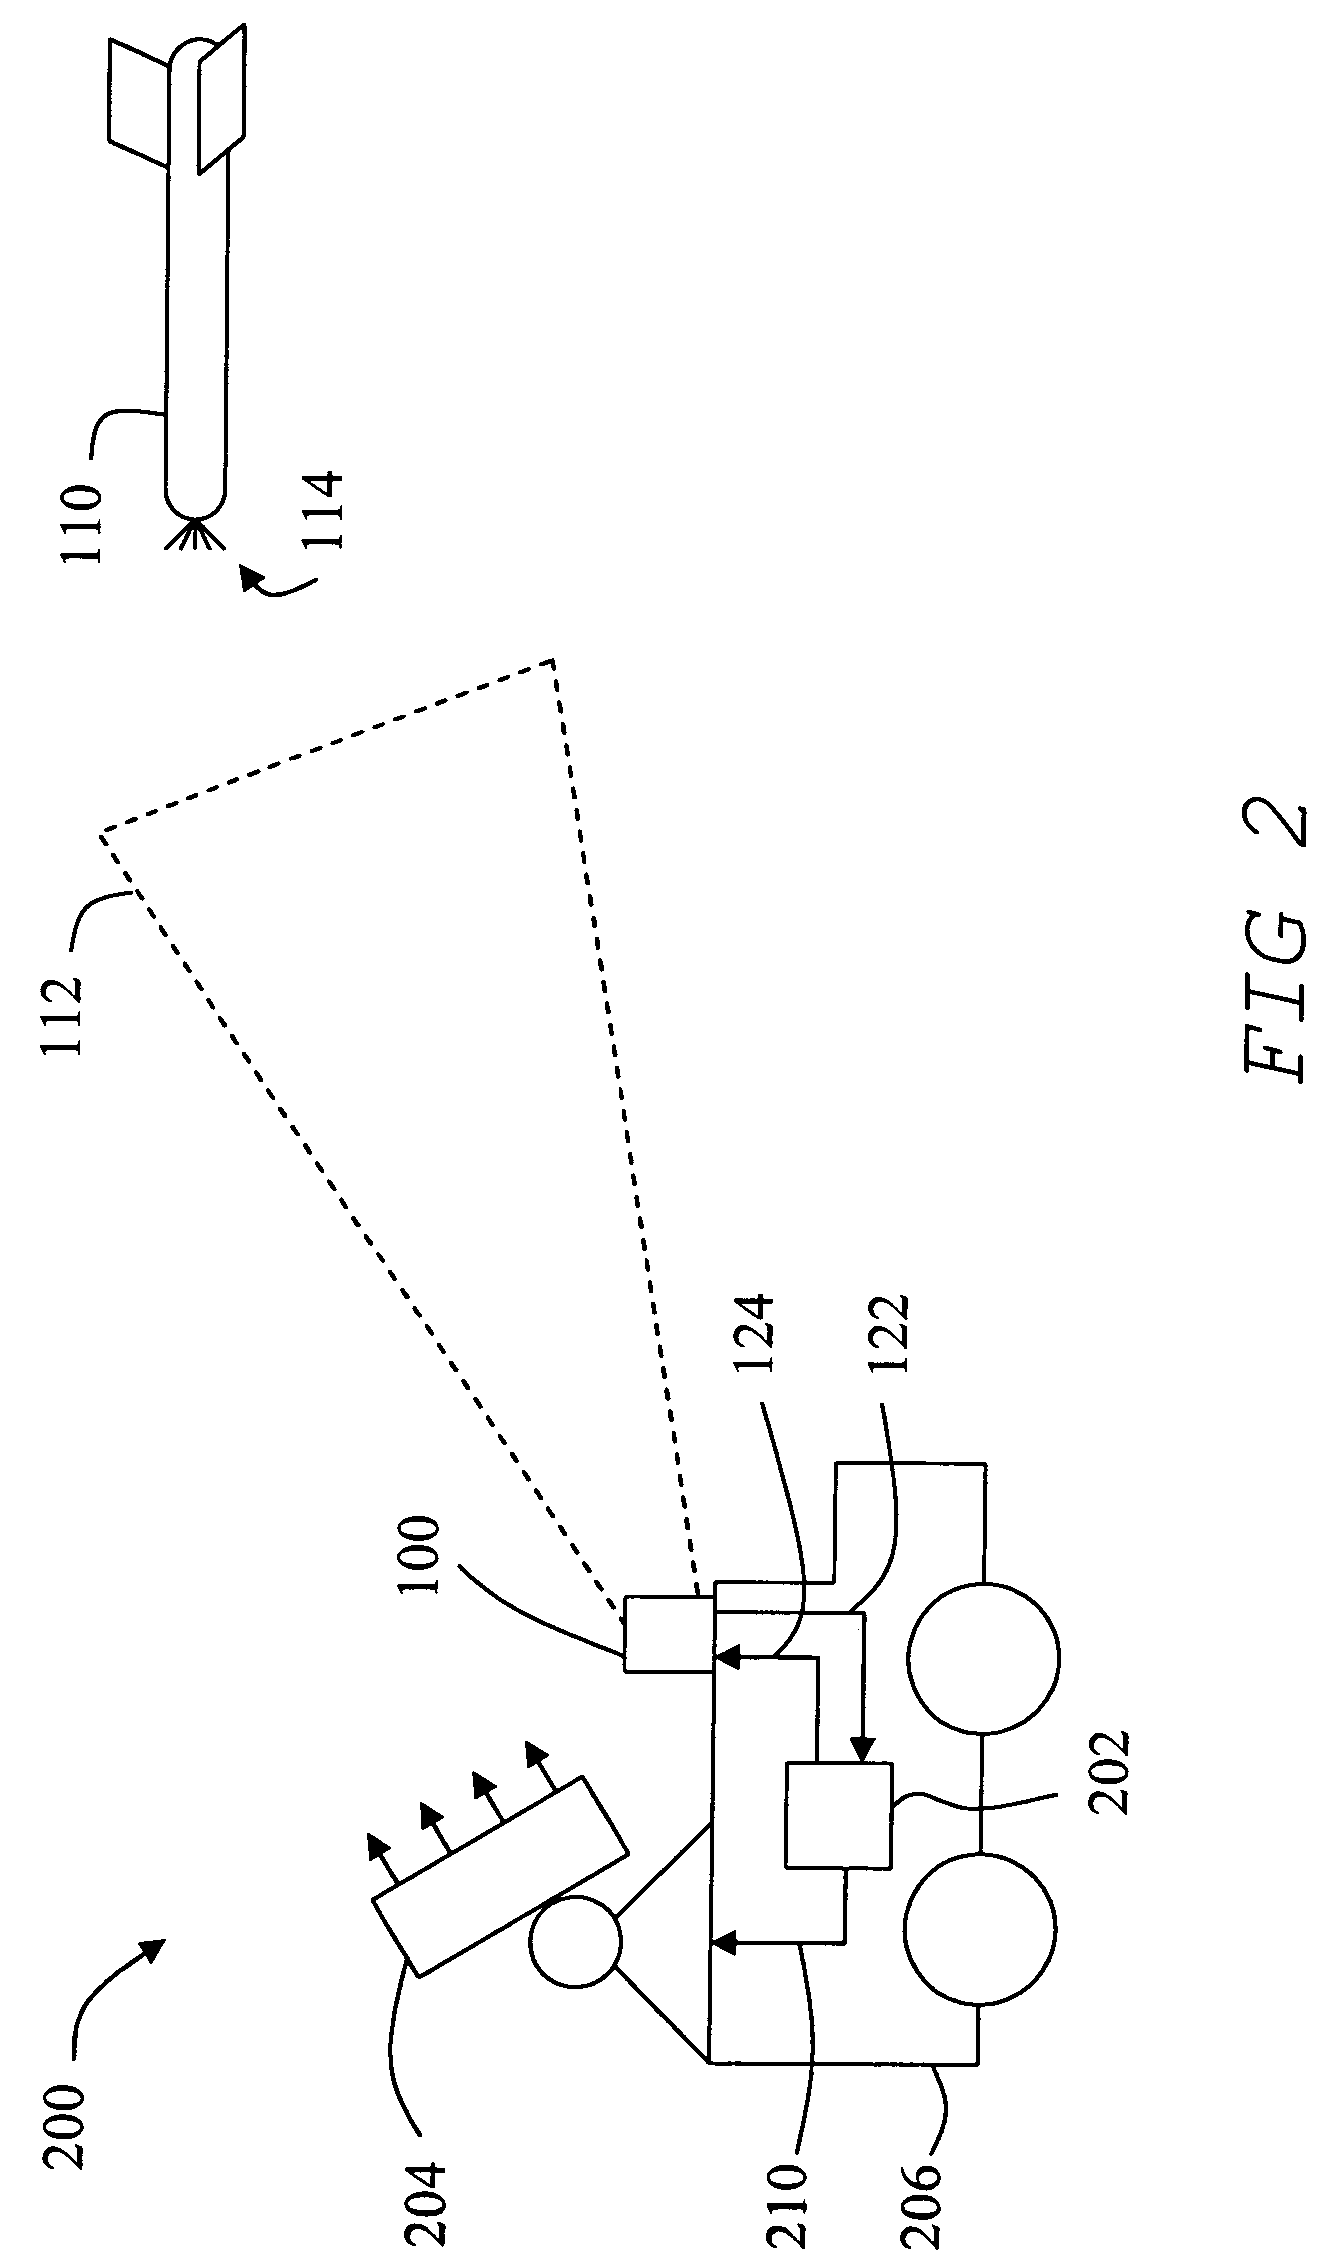 Optical sensing apparatus and method for determining highest intensity of light in an array